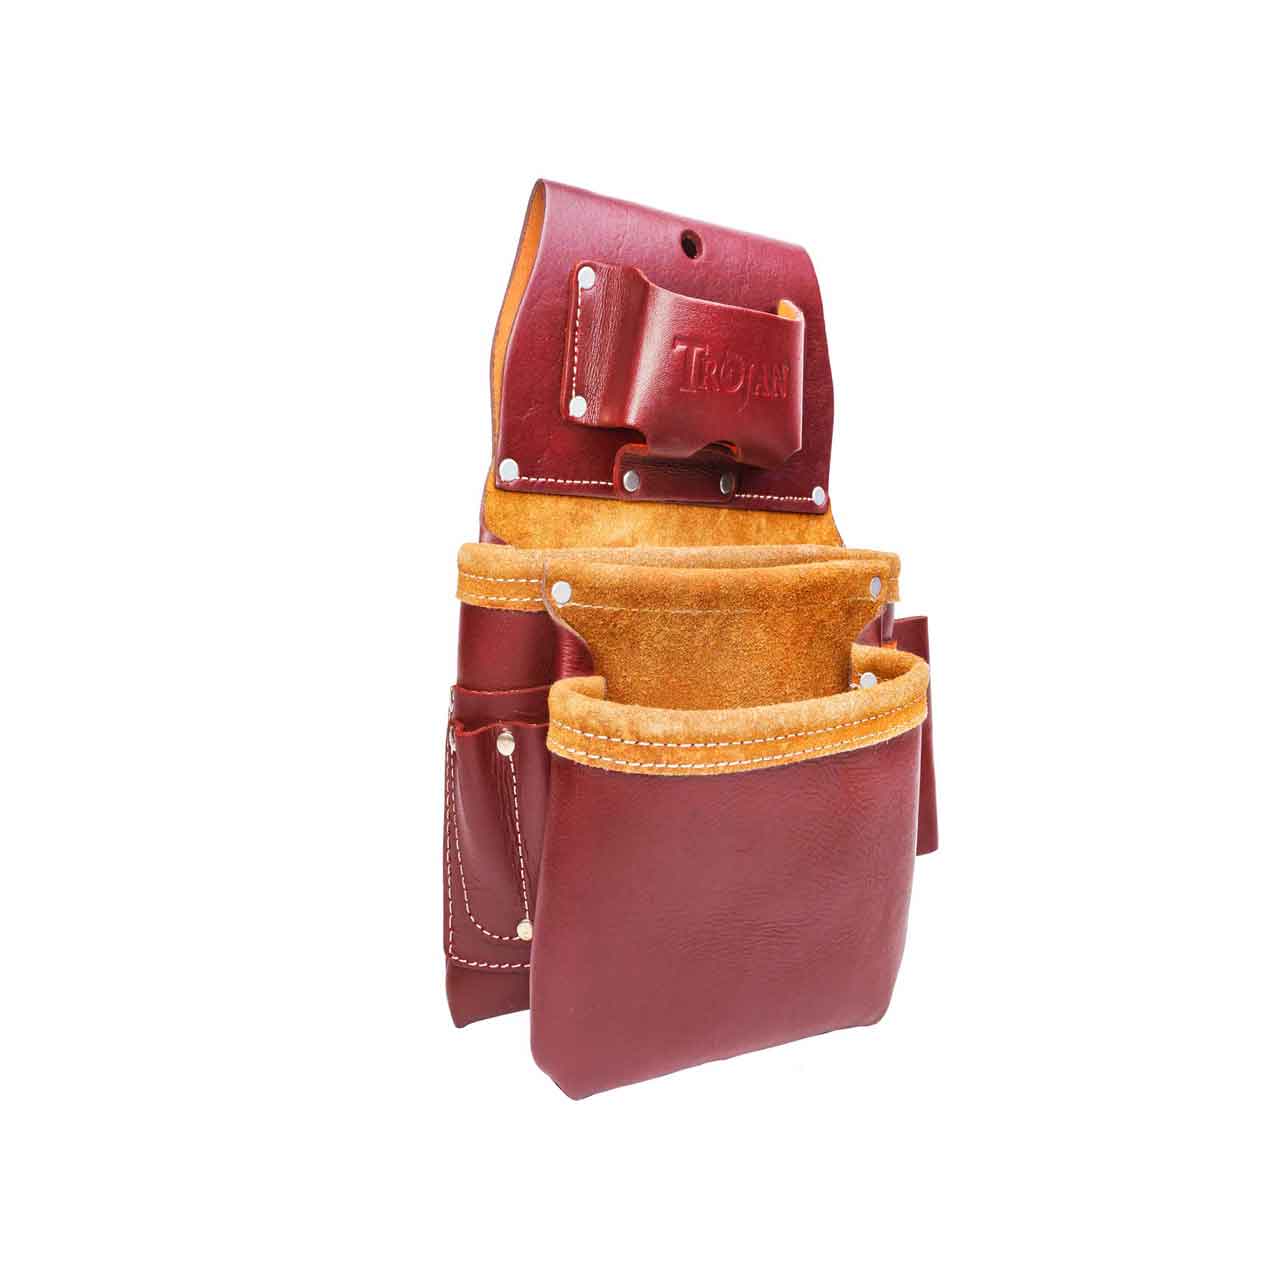 China Factory PU Leather Bag Handles, with Iron Rivets, for Purse Handles  Bag Making Supplie 60x1.85x0.35cm, Hole: 3mm in bulk online 